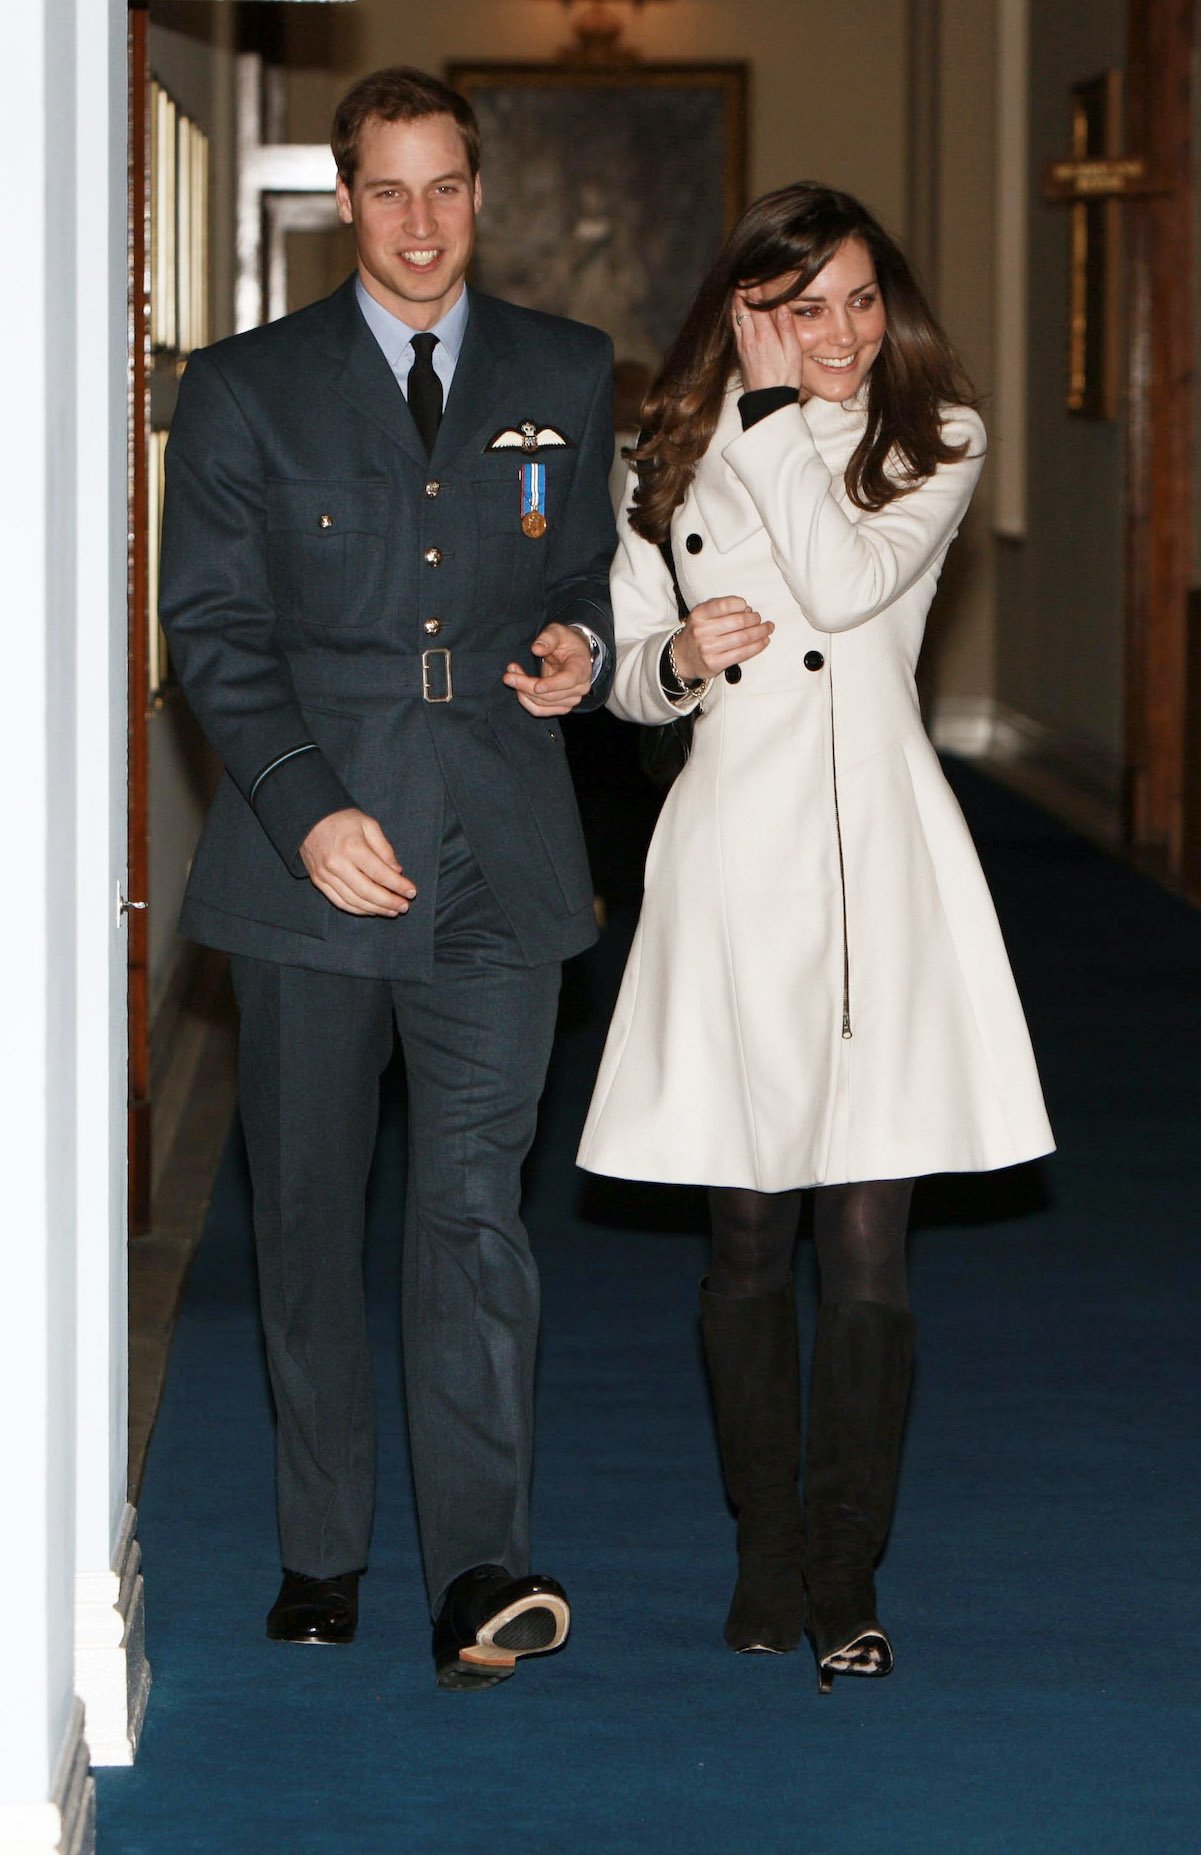 Prince William and then-girlfriend (now wife) Kate Middleton attend his RAF Cranwell graduation ceremony in 2008